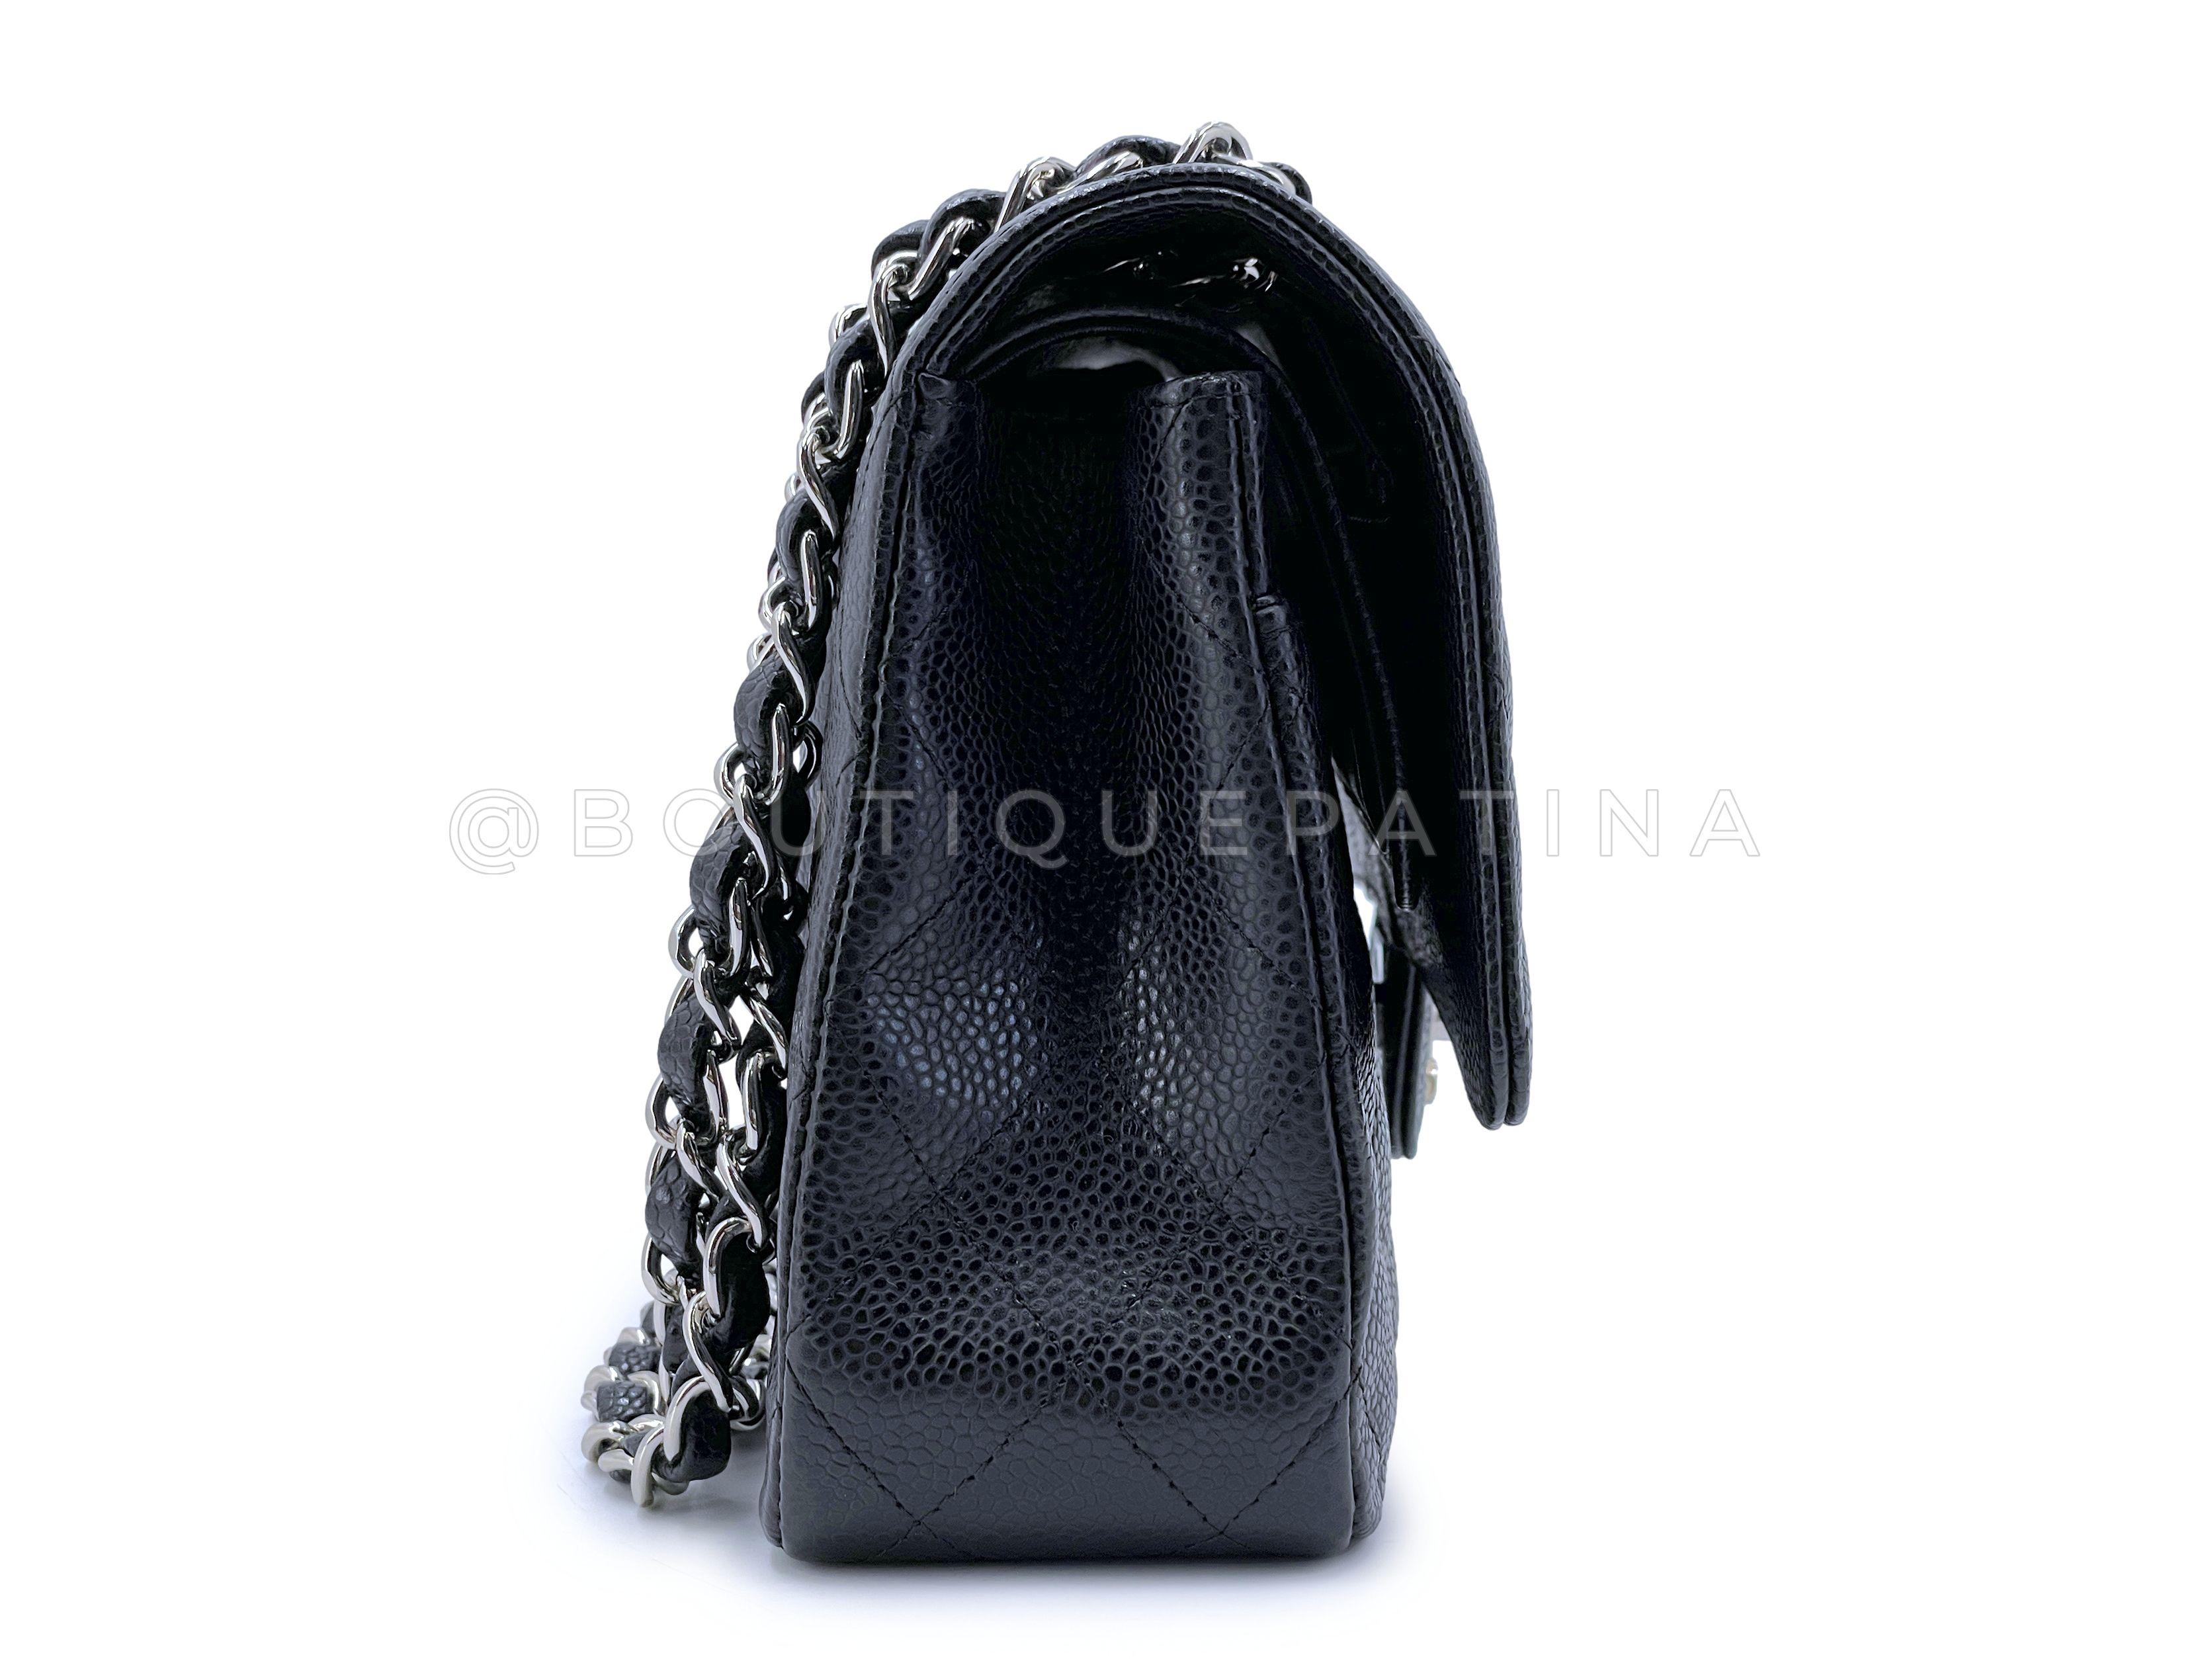 Chanel 2009 Black Caviar Medium Classic Double Flap Bag SHW  65078 In Excellent Condition For Sale In Costa Mesa, CA